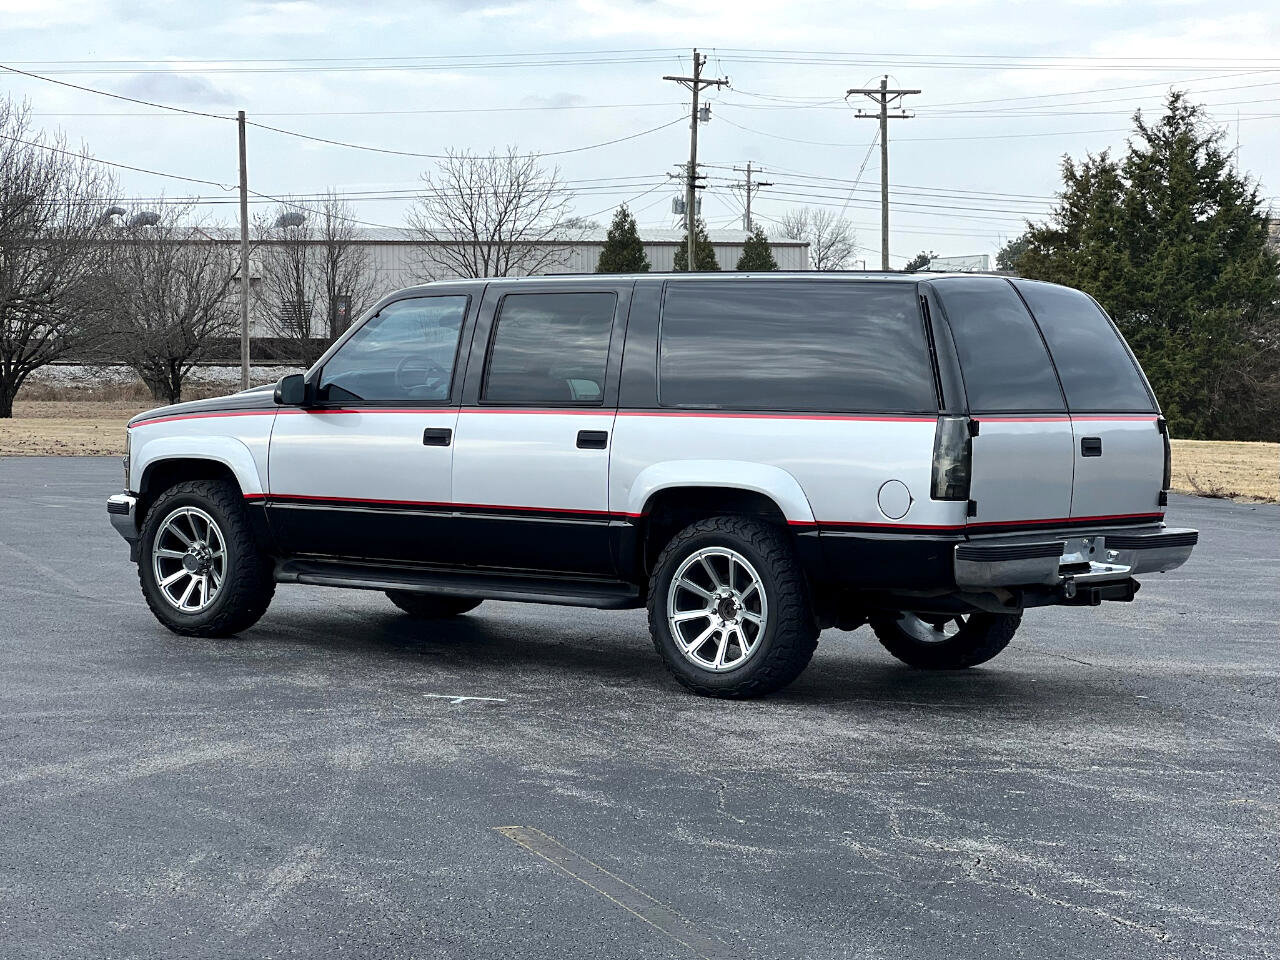 Used 1998 Chevrolet Suburban for Sale Right Now - Autotrader